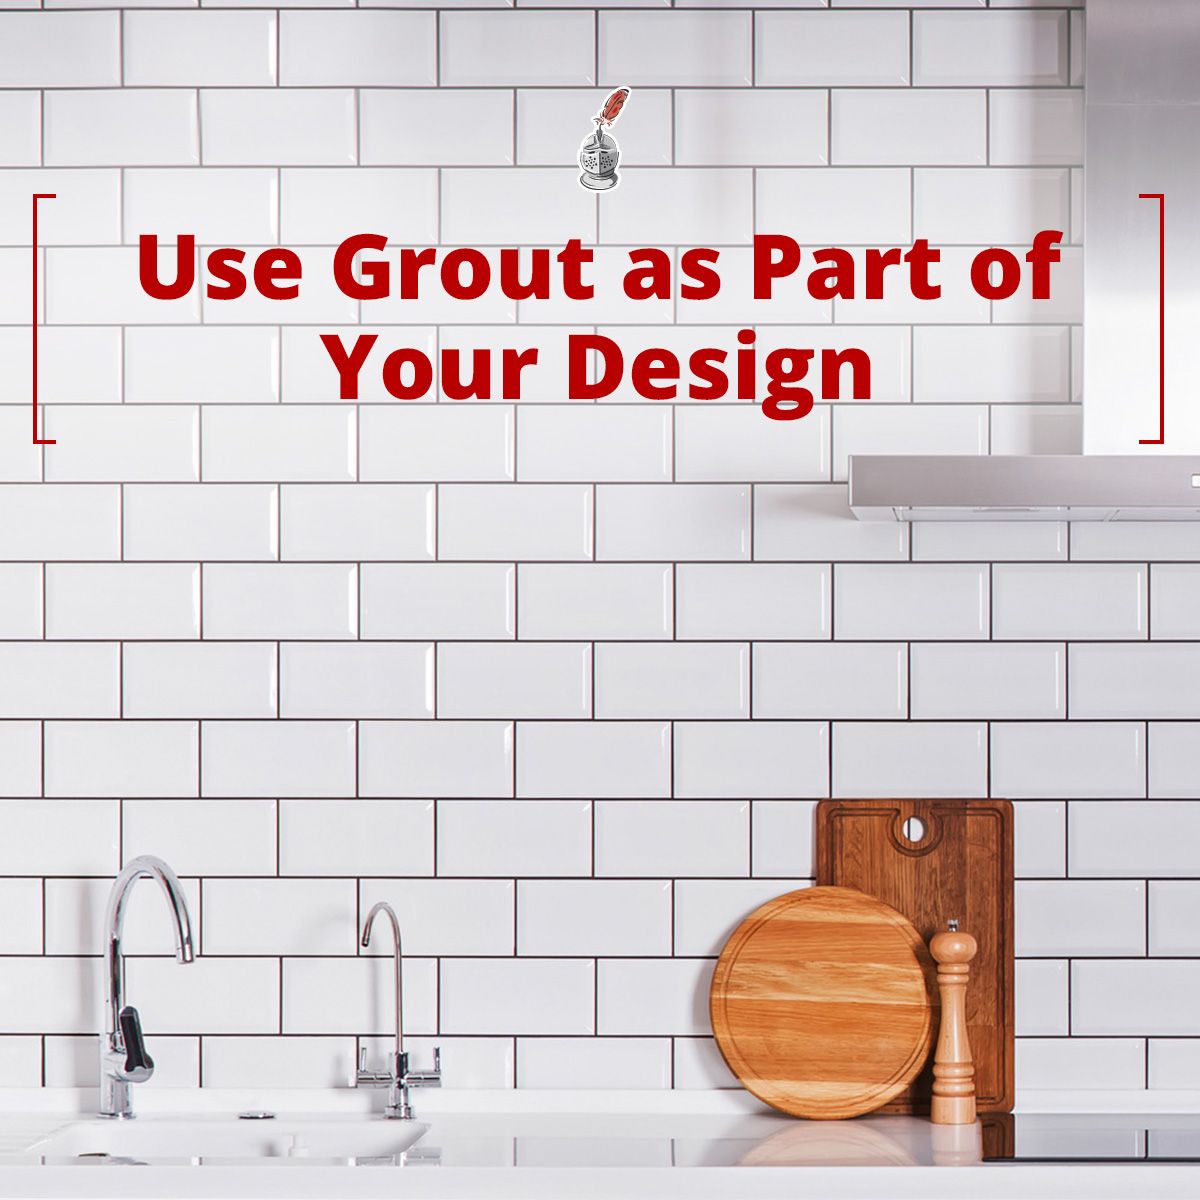 Use Grout as Part of Your Design